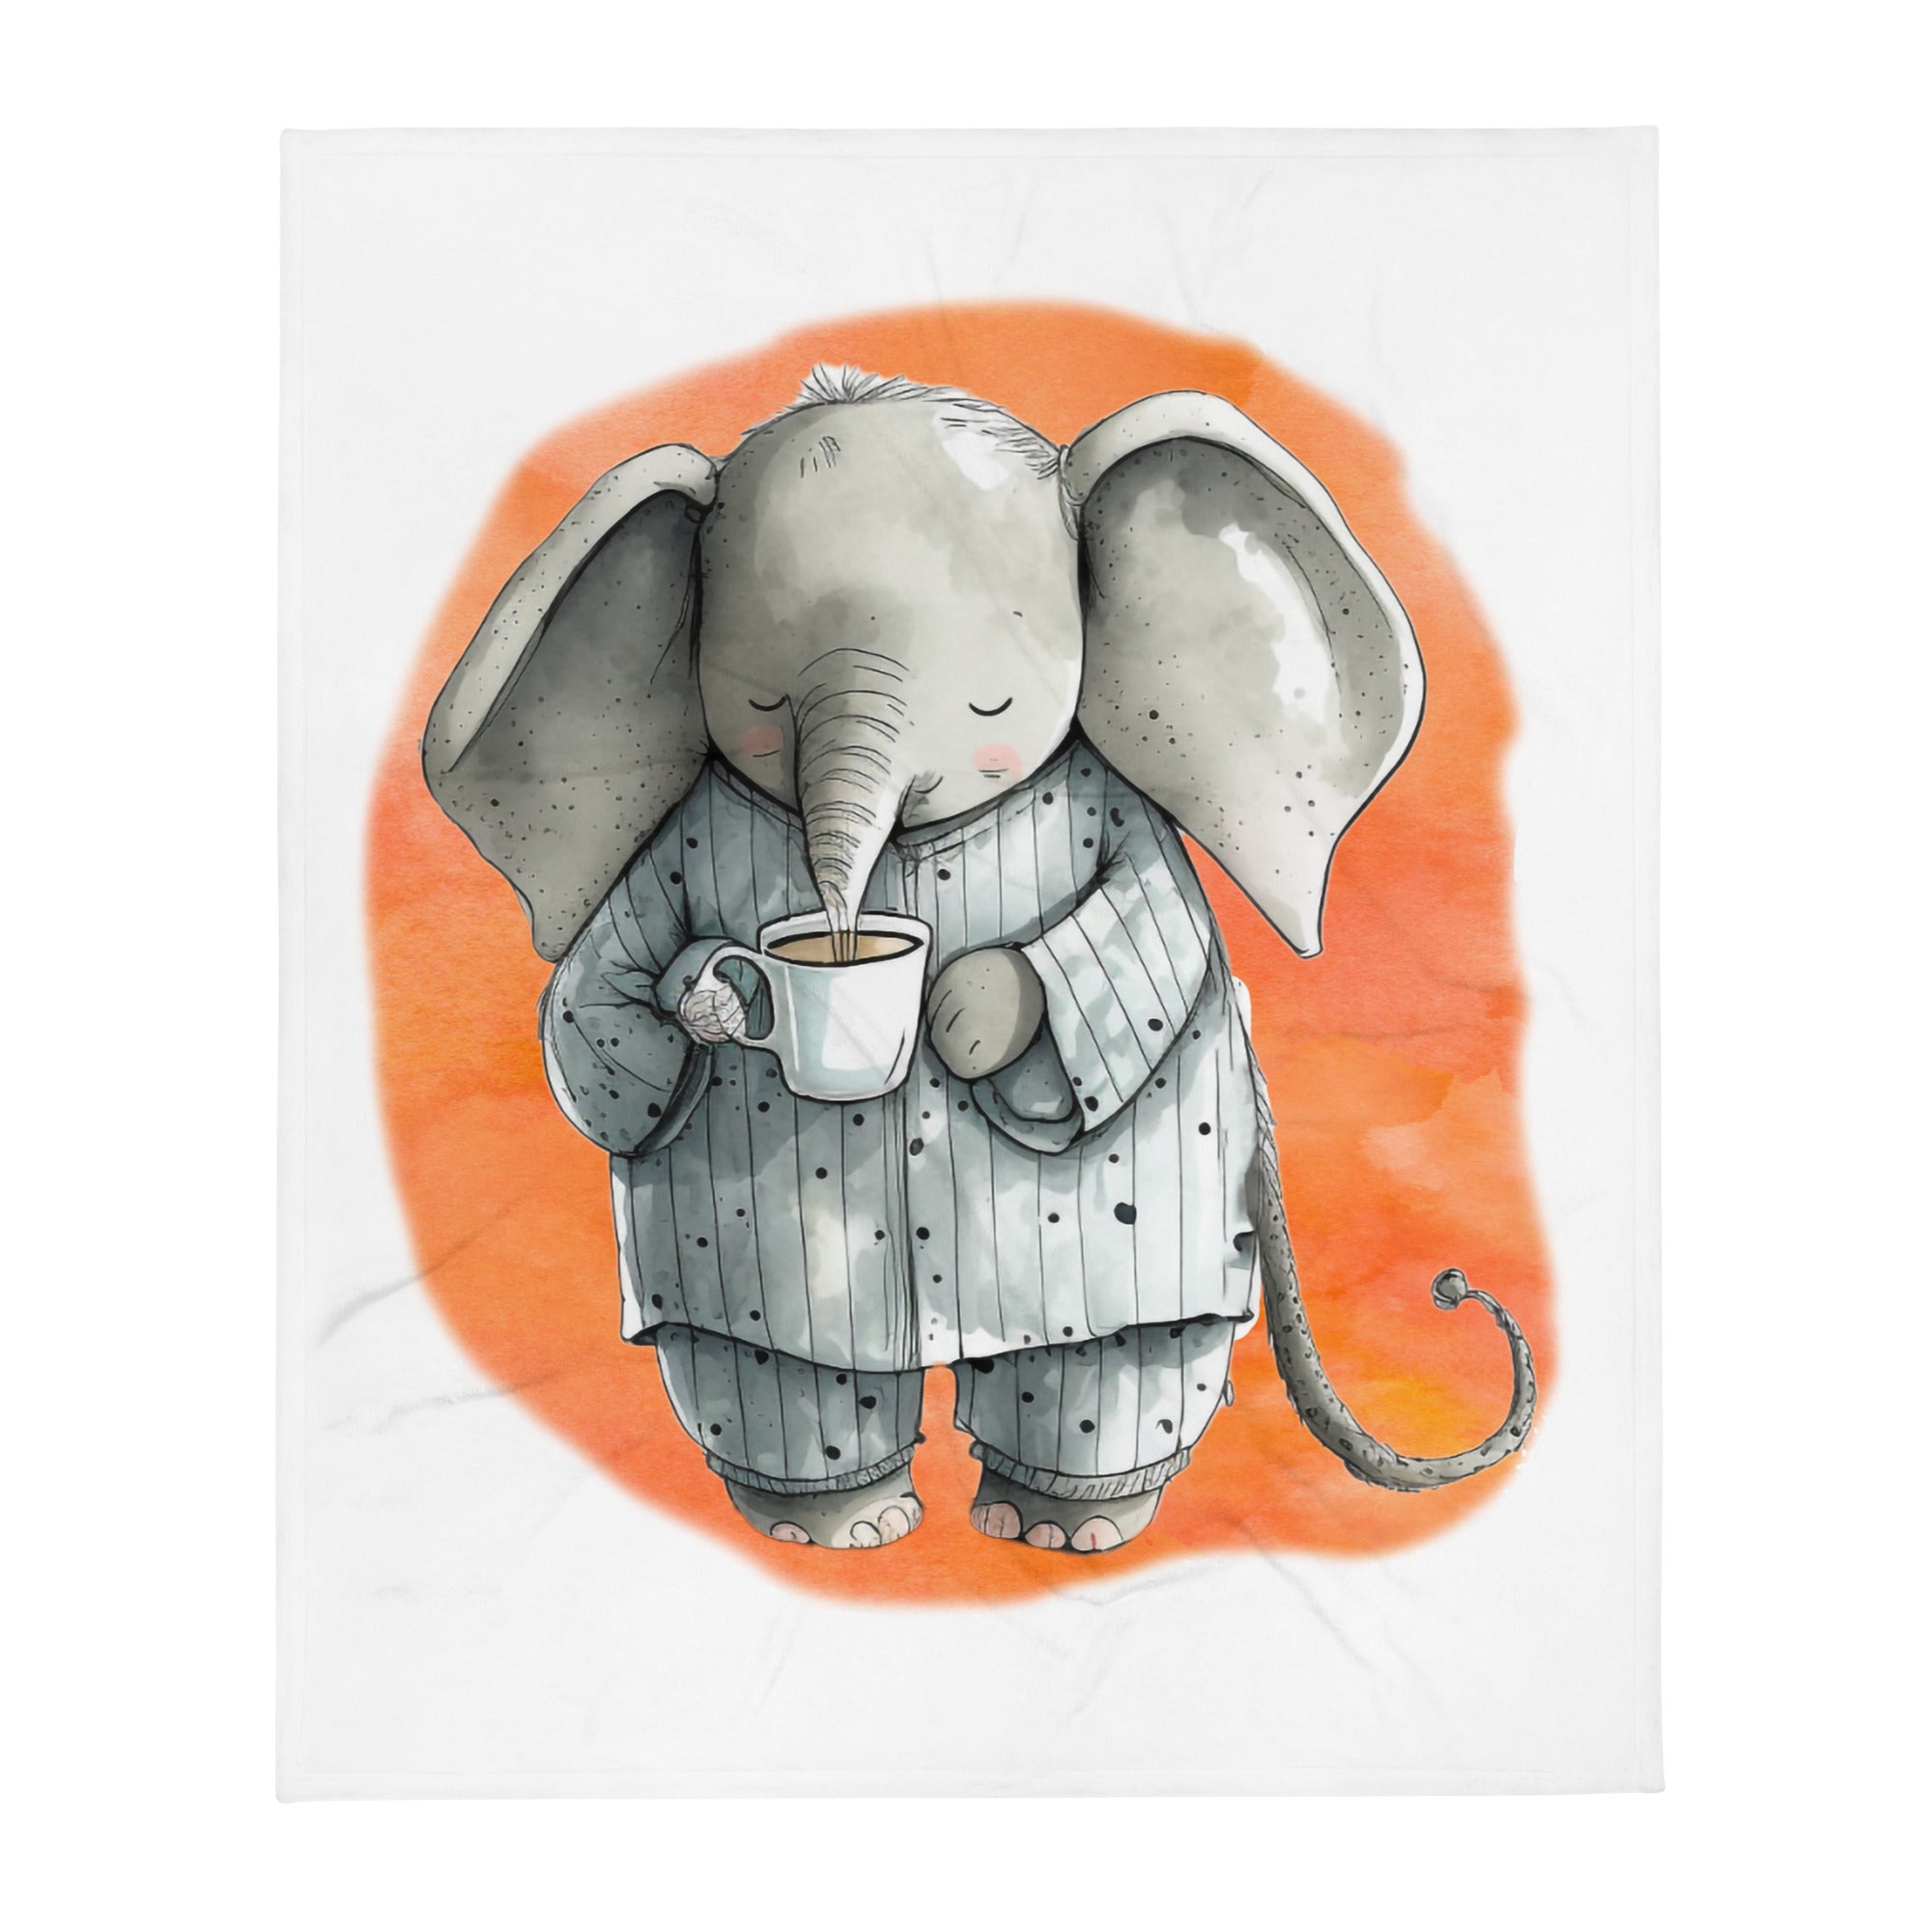 Sleepy Elephant 100% Polyester Soft Silk Touch Fabric Throw Blanket - Cozy, Durable and Adorable